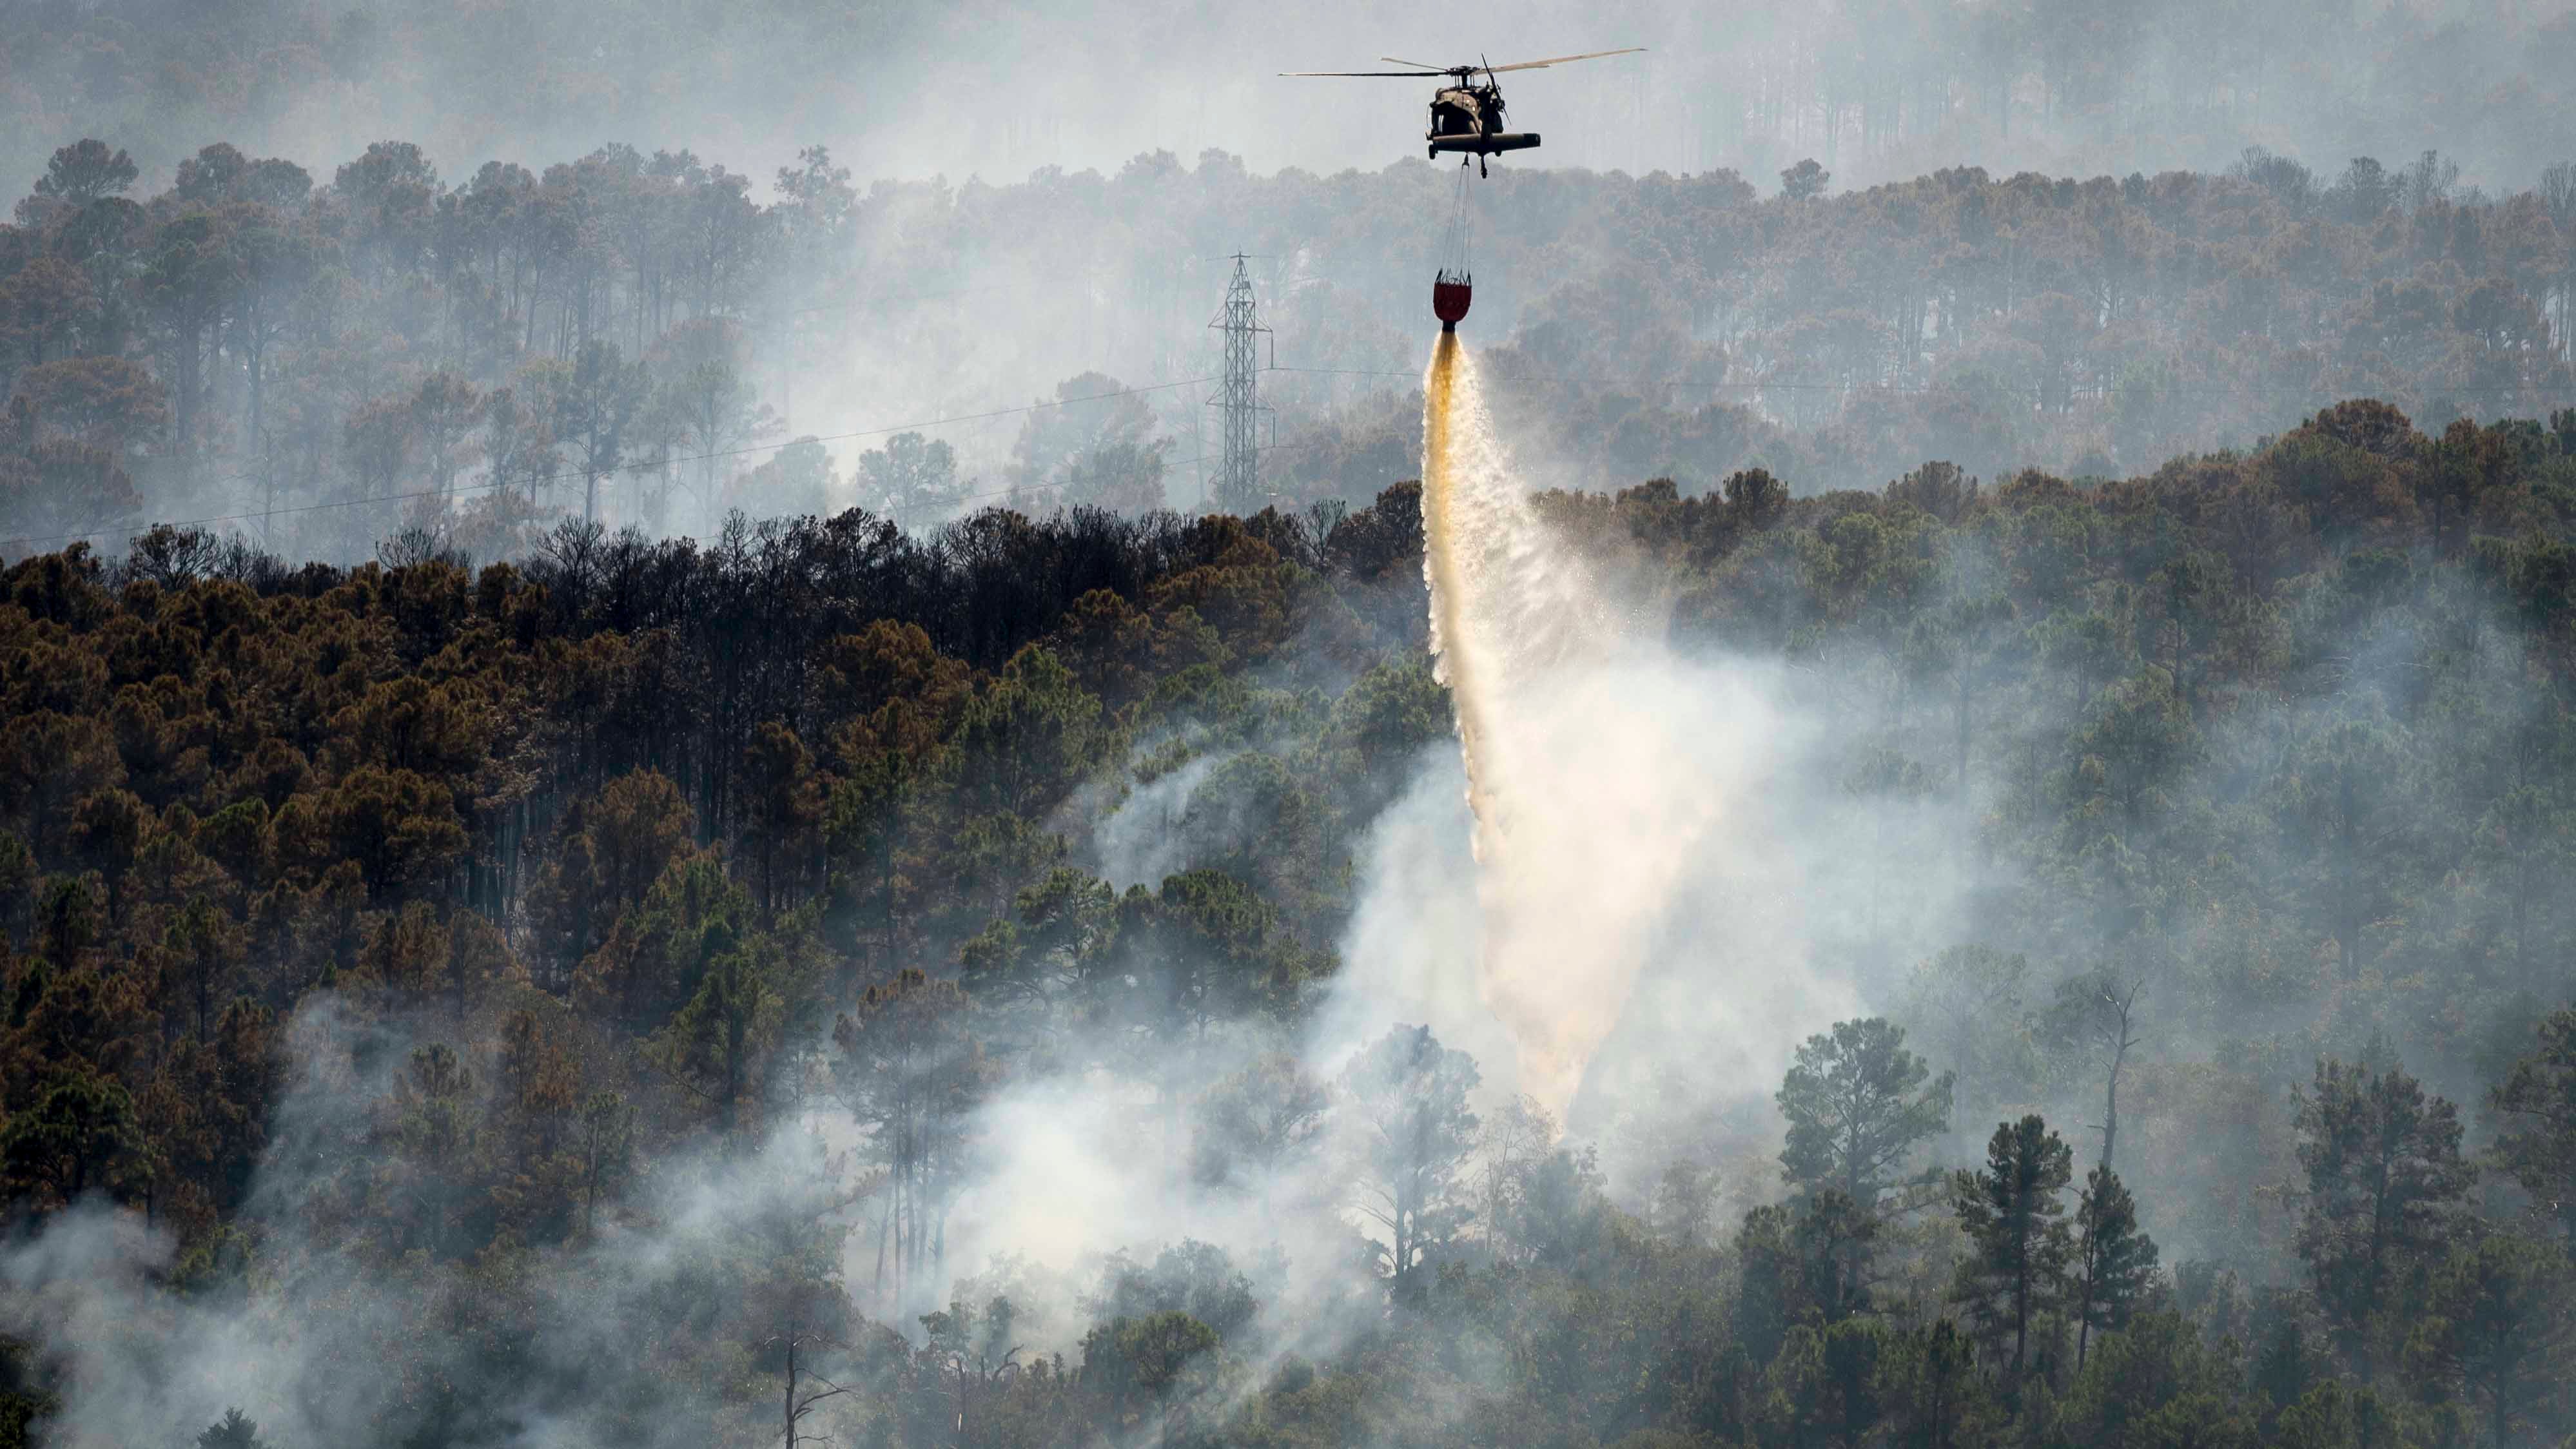 Black Hawk works to put out wildfire